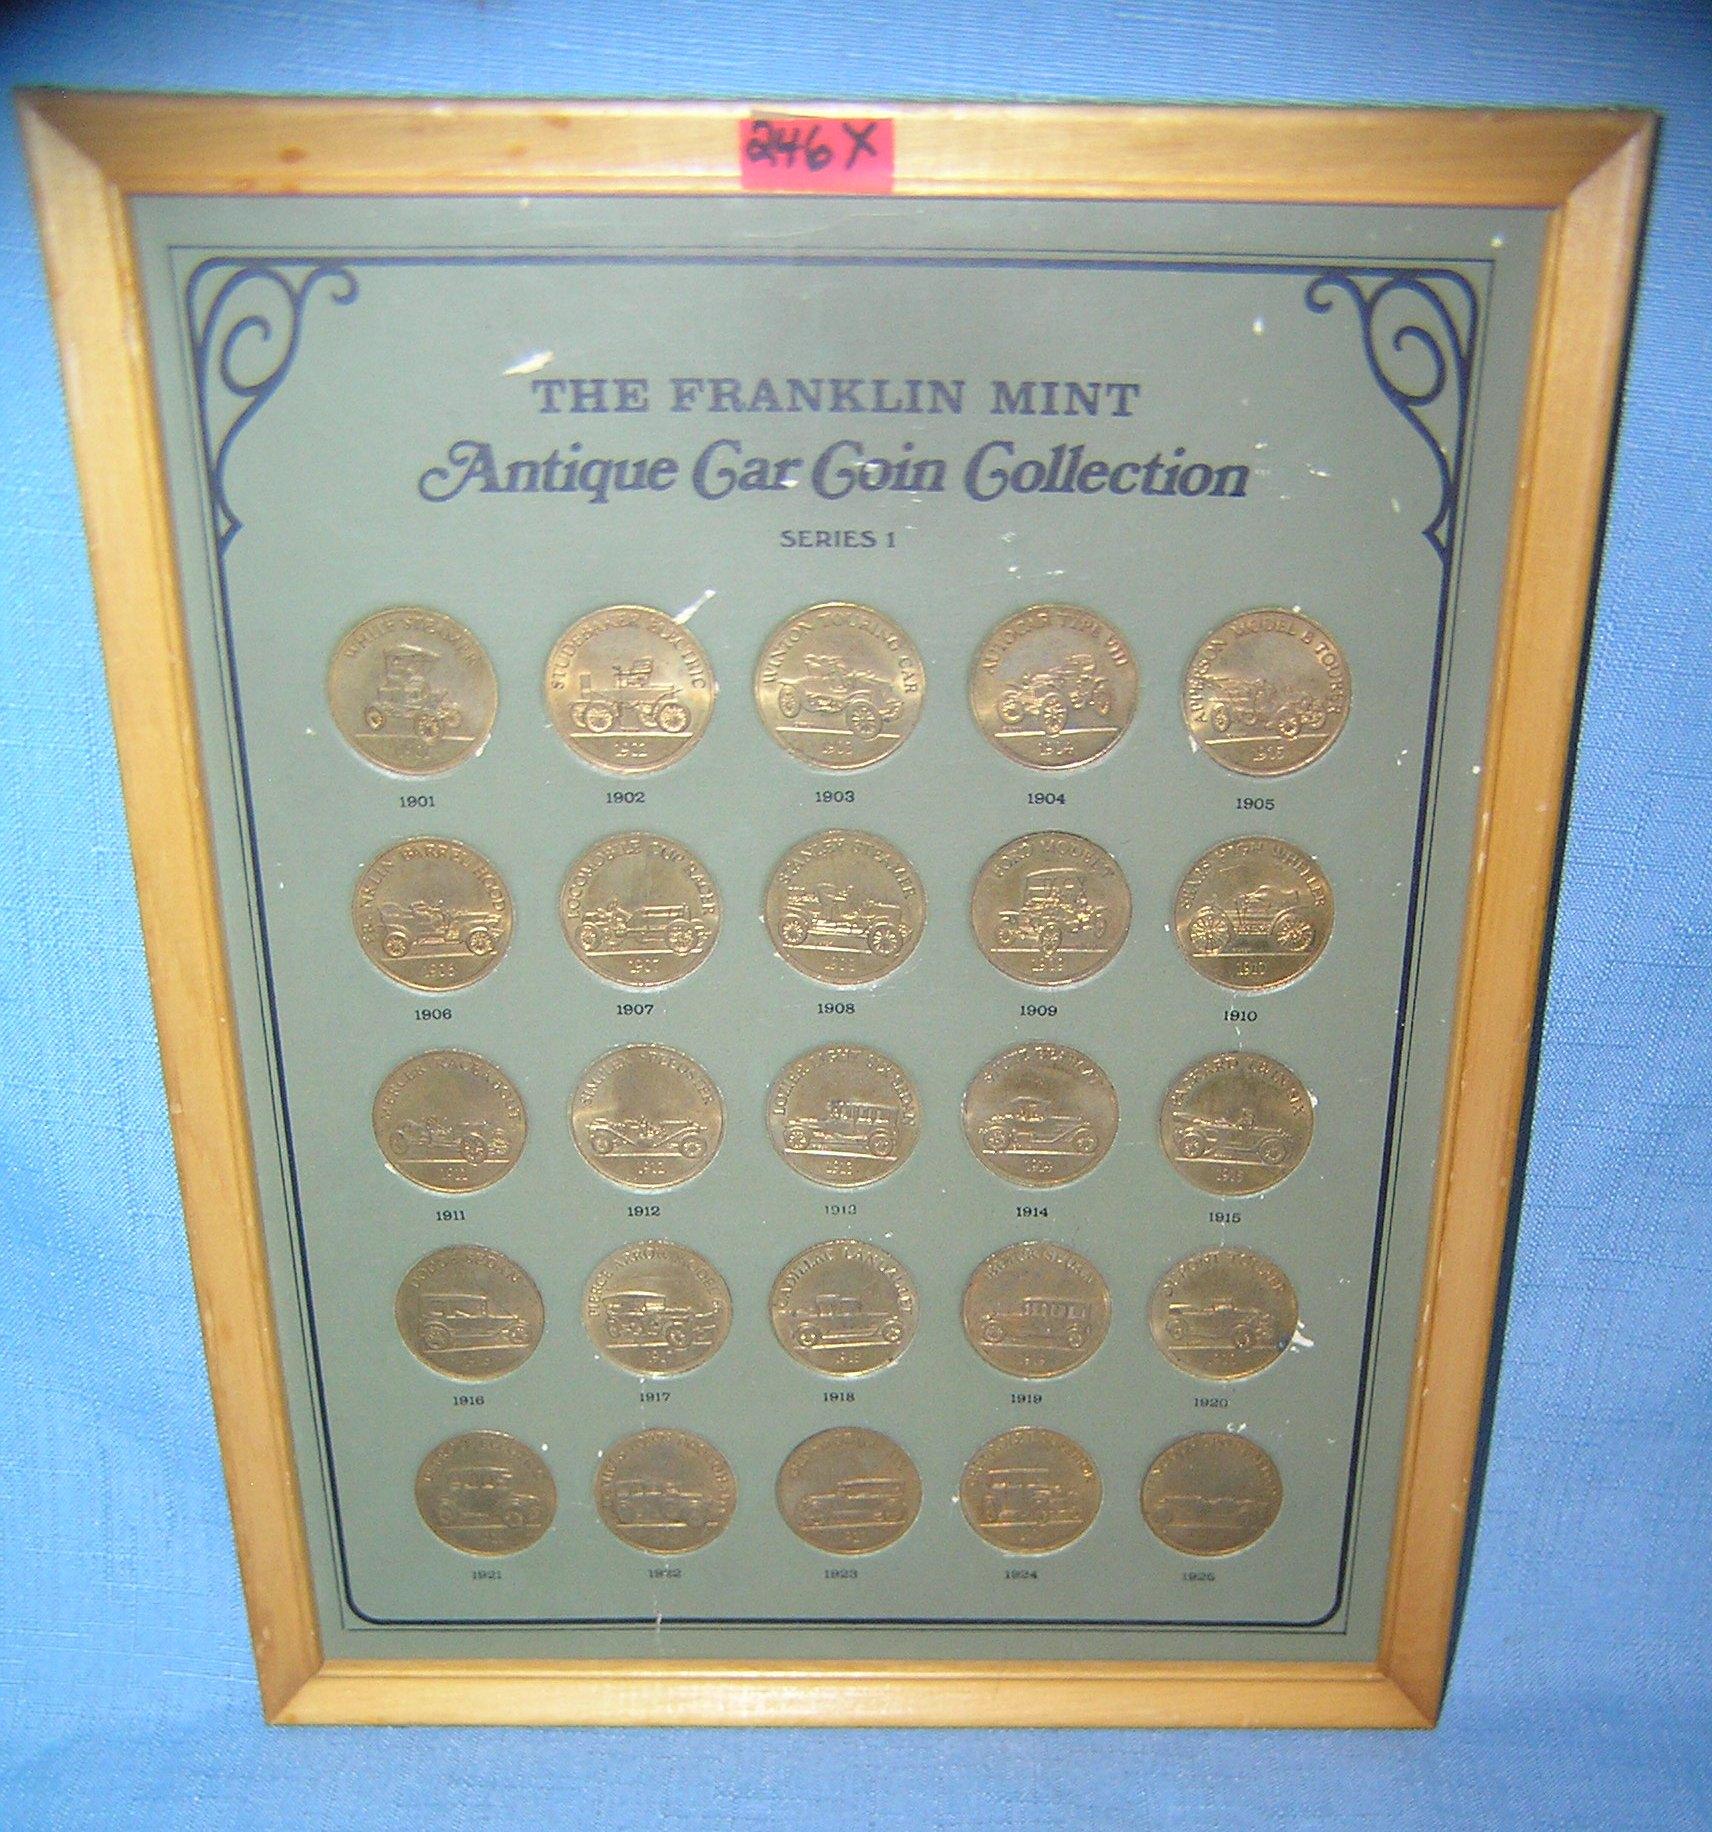 The Franklin mint antique car coin collrction series